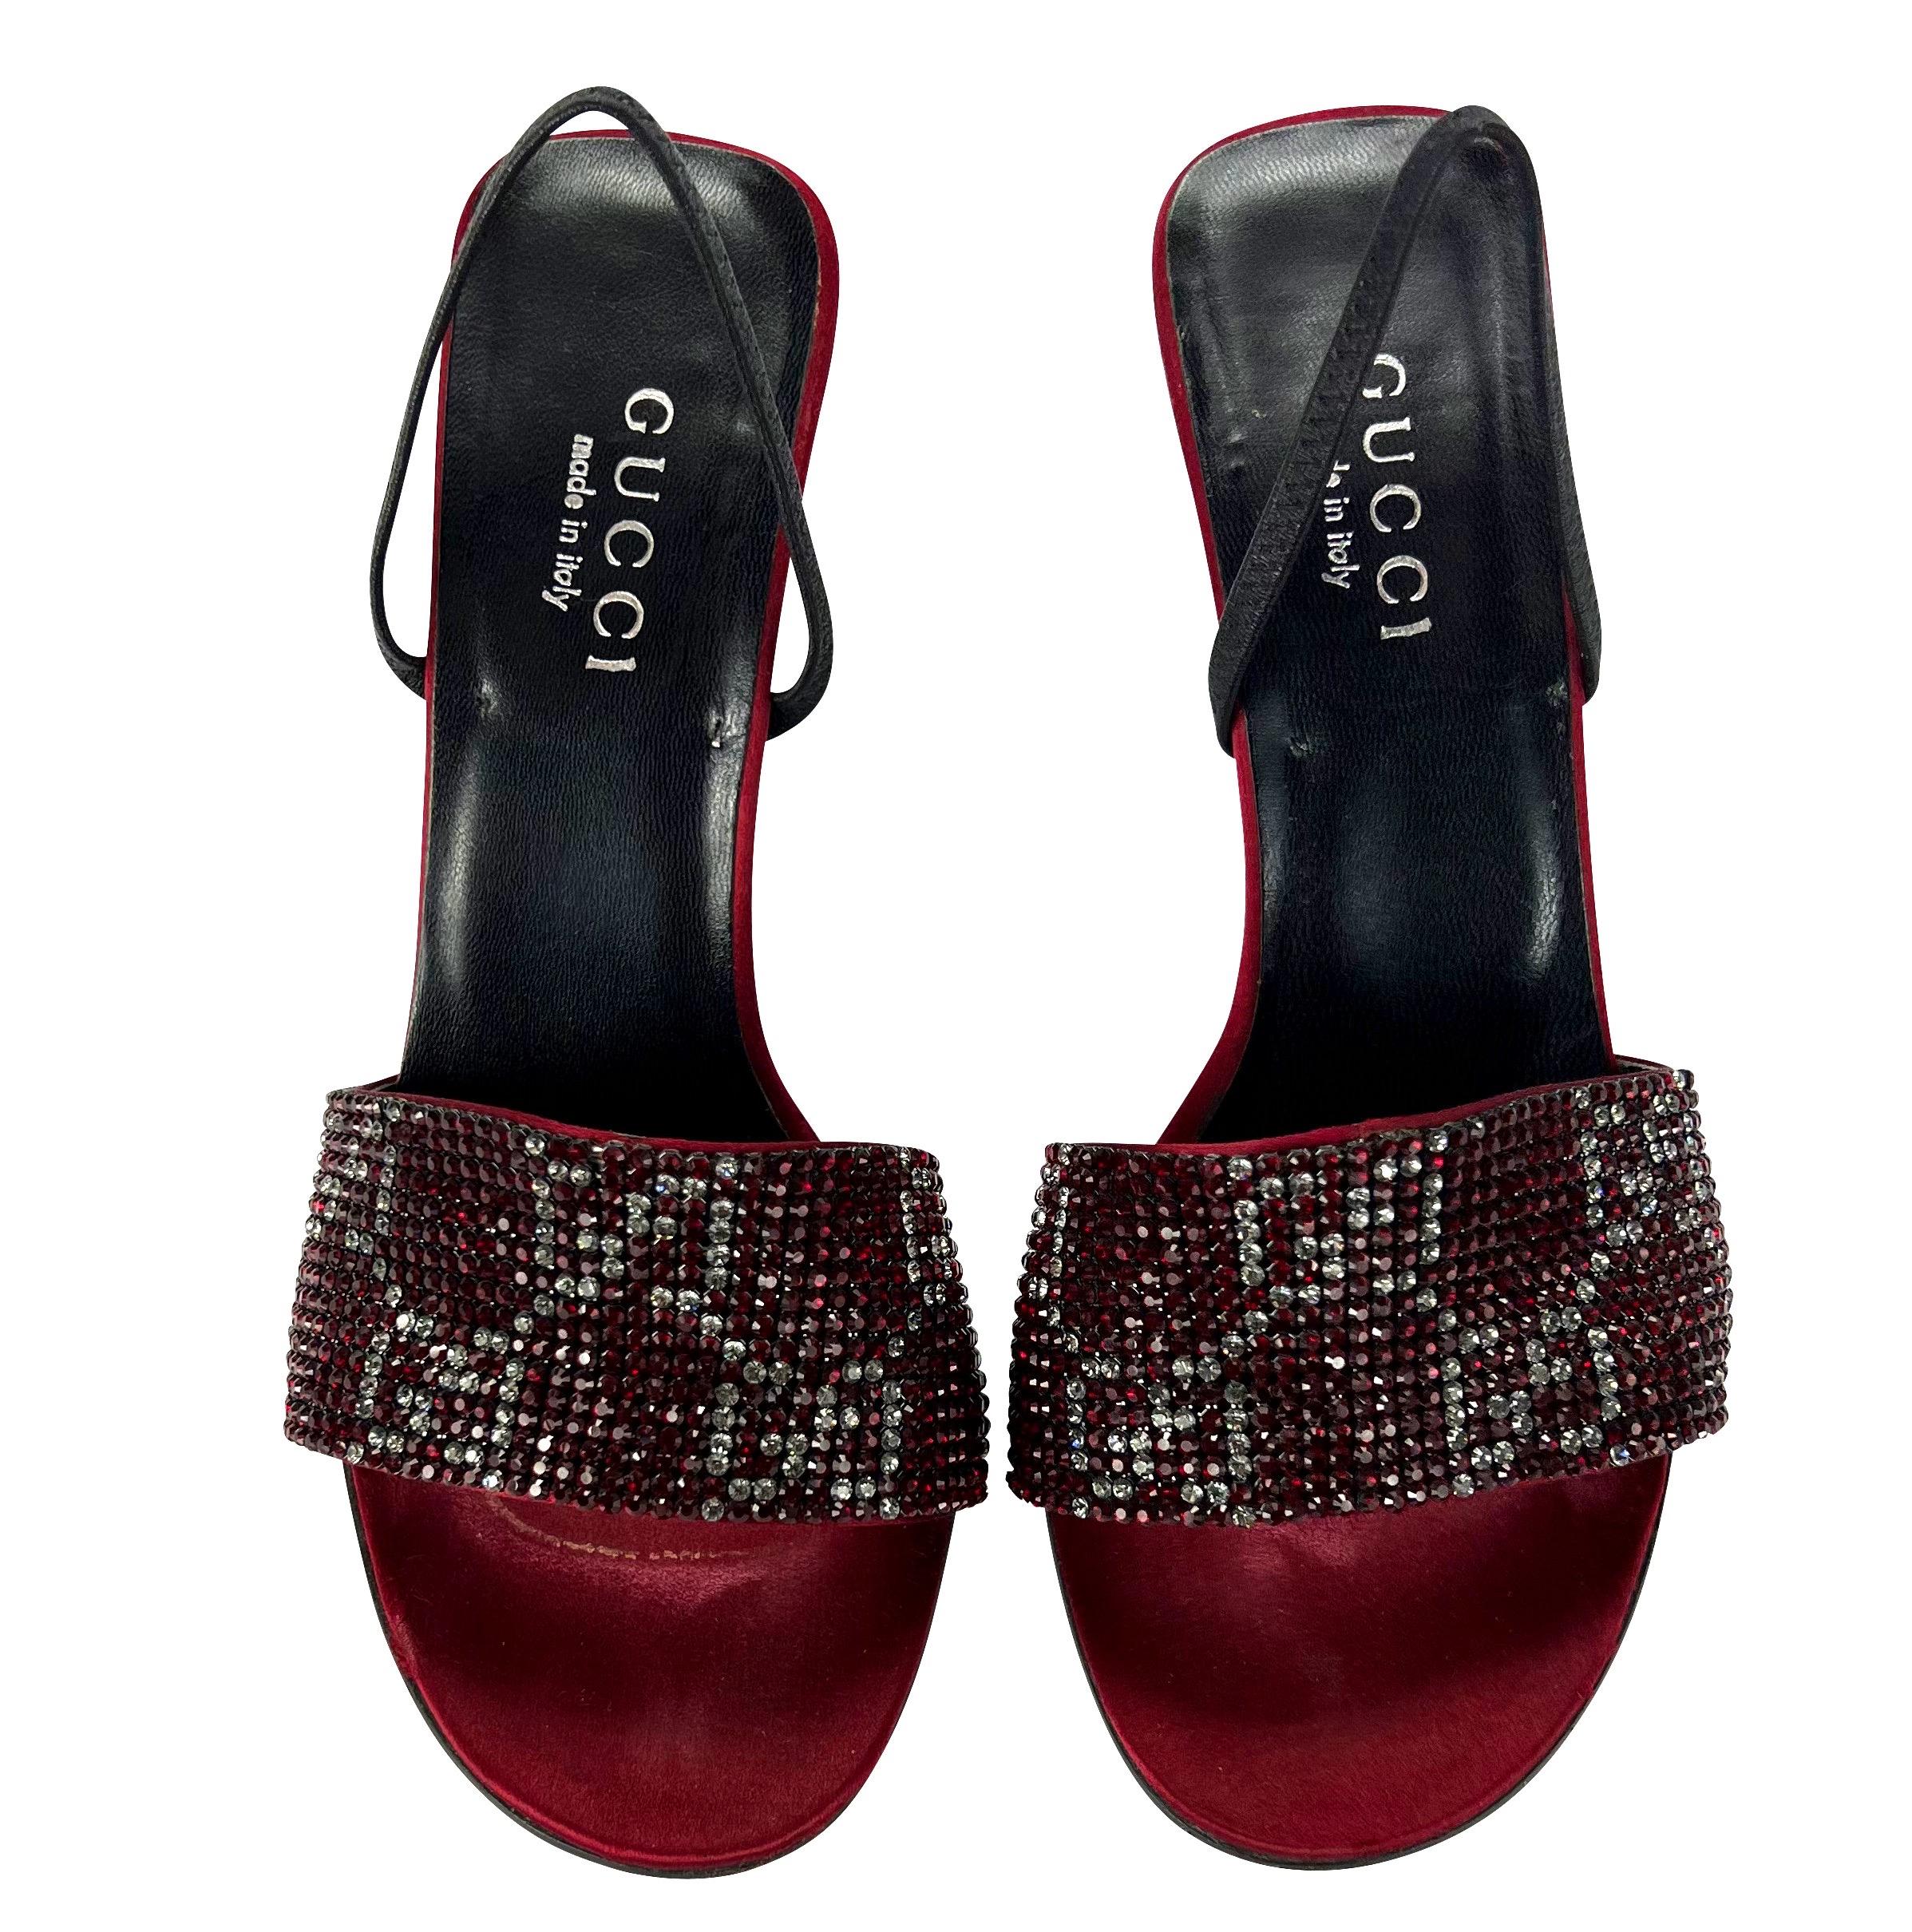 S/S 1998 Gucci Tom Ford Red Crystal 'GG' Heels Size 38C In Good Condition For Sale In West Hollywood, CA